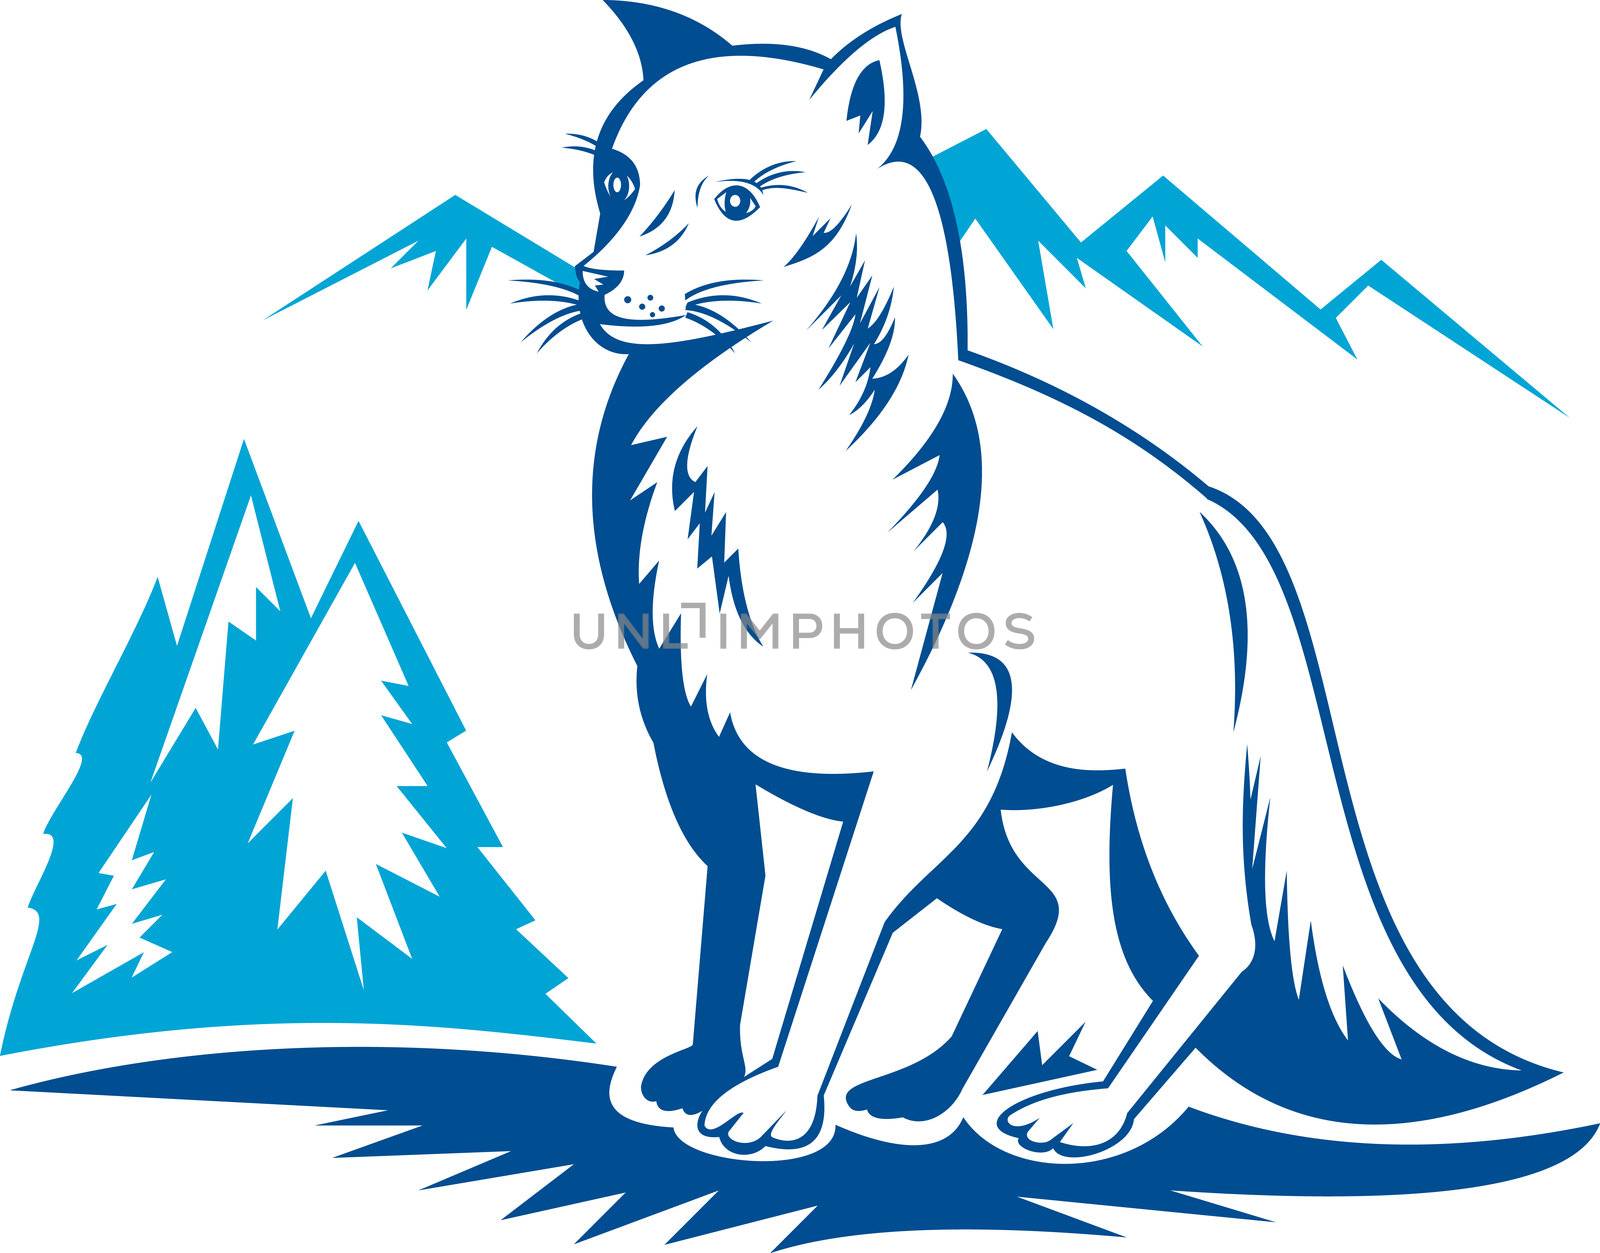 Fox with mountains in the background by patrimonio